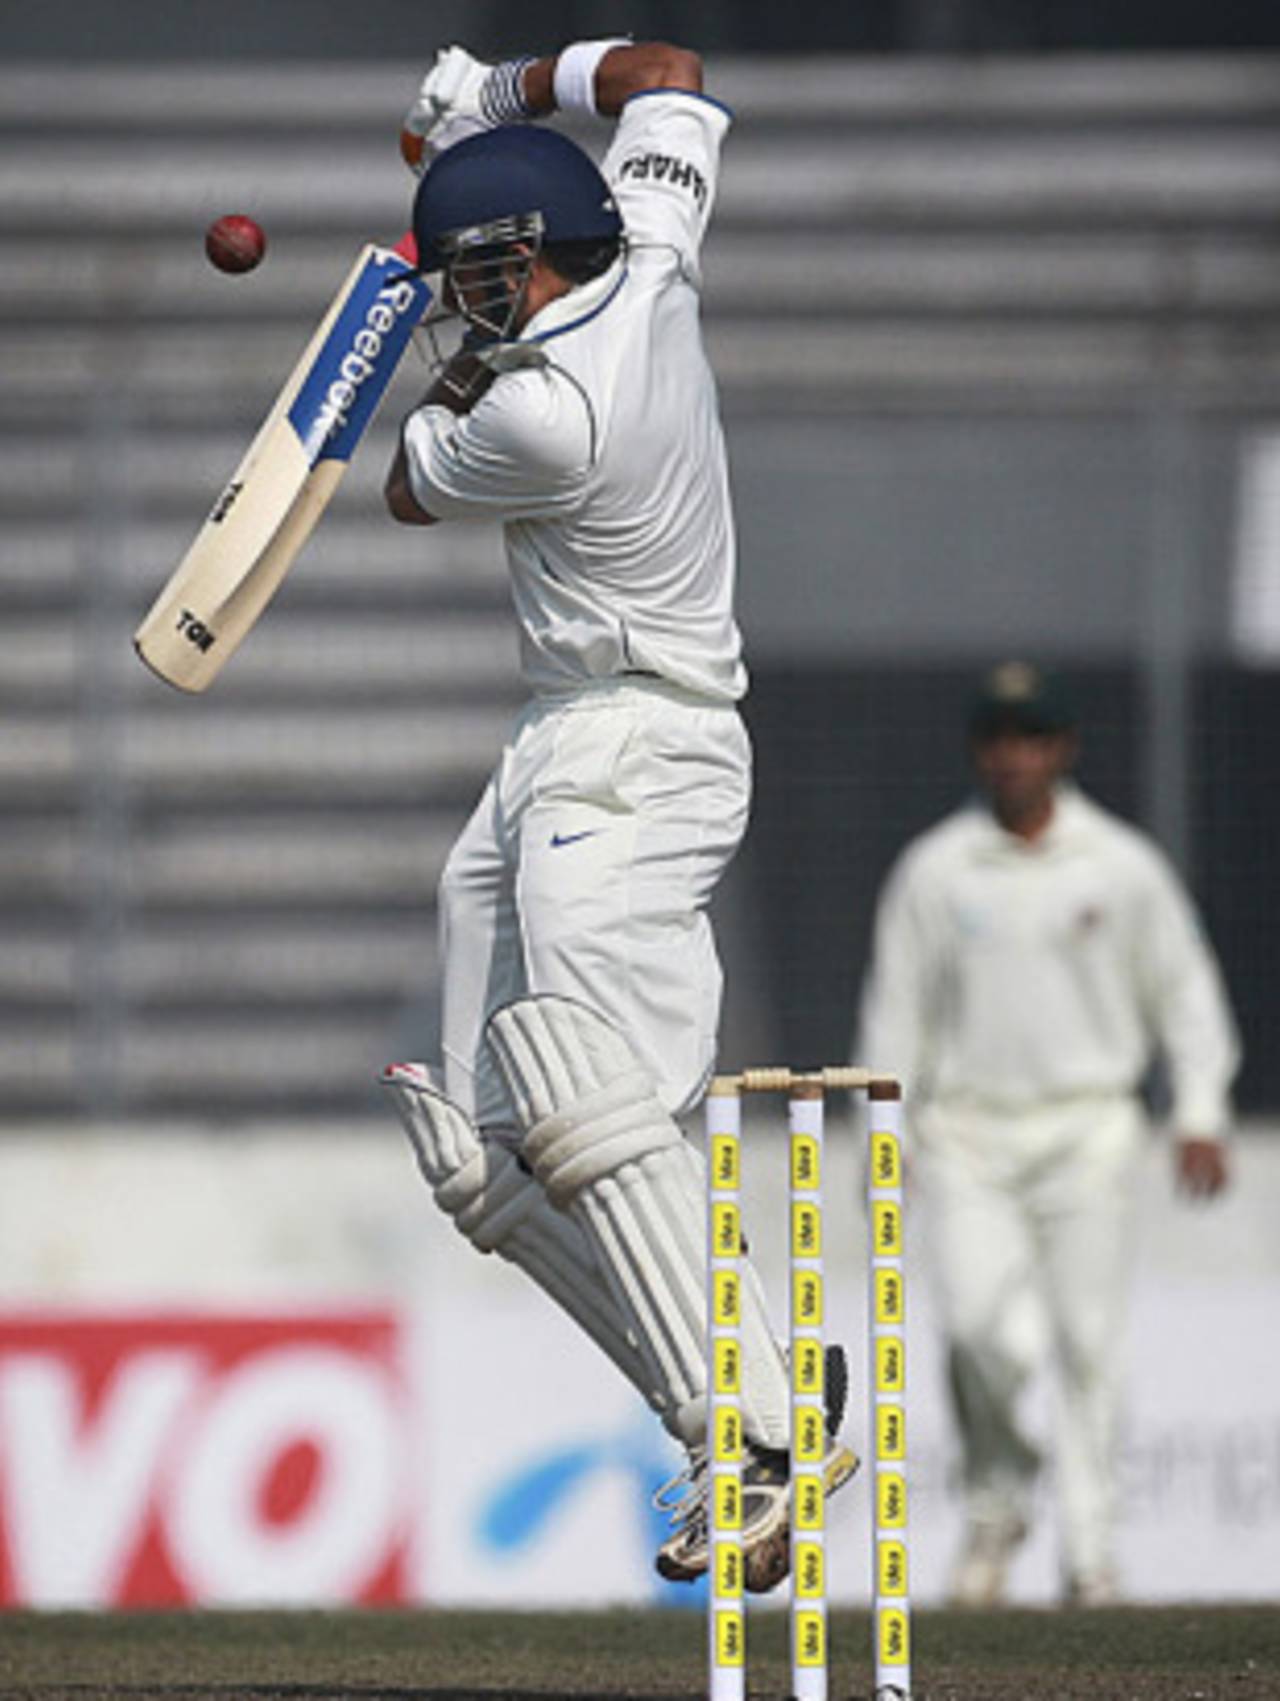 Gautam Gambhir fends off a short delivery, Bangladesh v India, 2nd Test, Mirpur, 2nd day, January 25, 2010